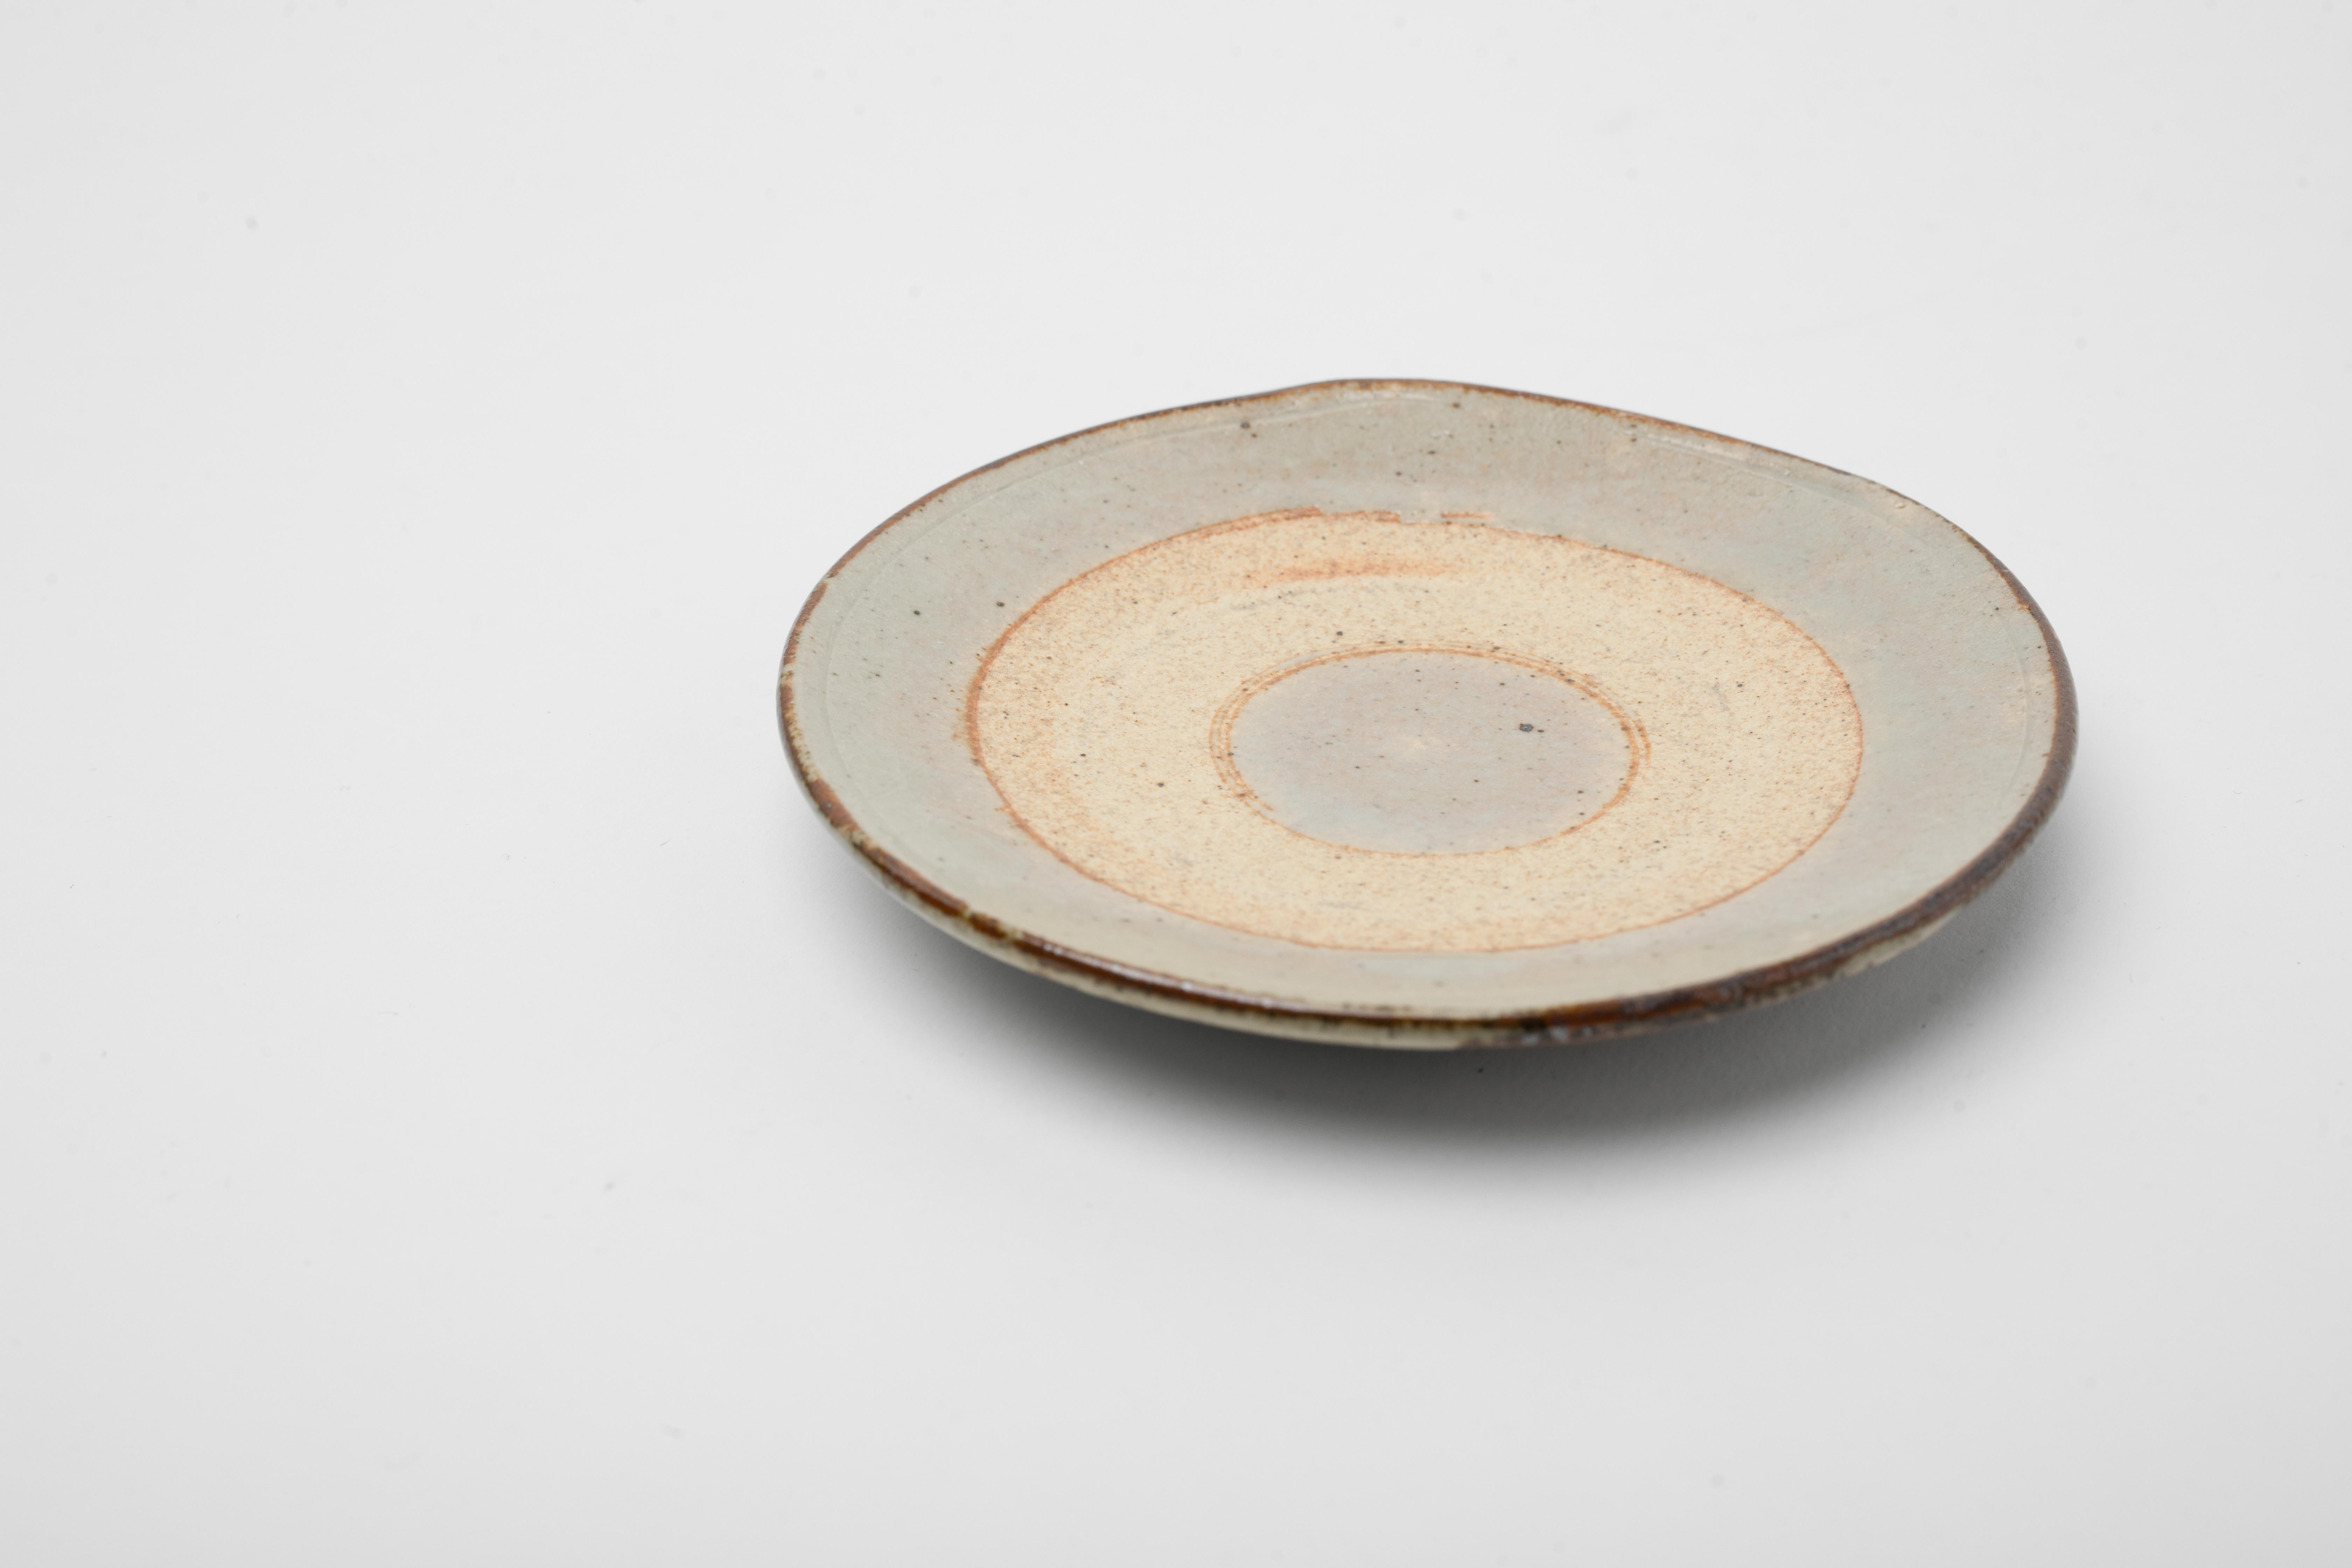 Beautifully crafted small plate from Japan. As you can see in the images only a small circle motif of the plate was left unglazed. It has a primitive feeling and old world energy. The piece is very simple and yet almost defines the wabi sabi